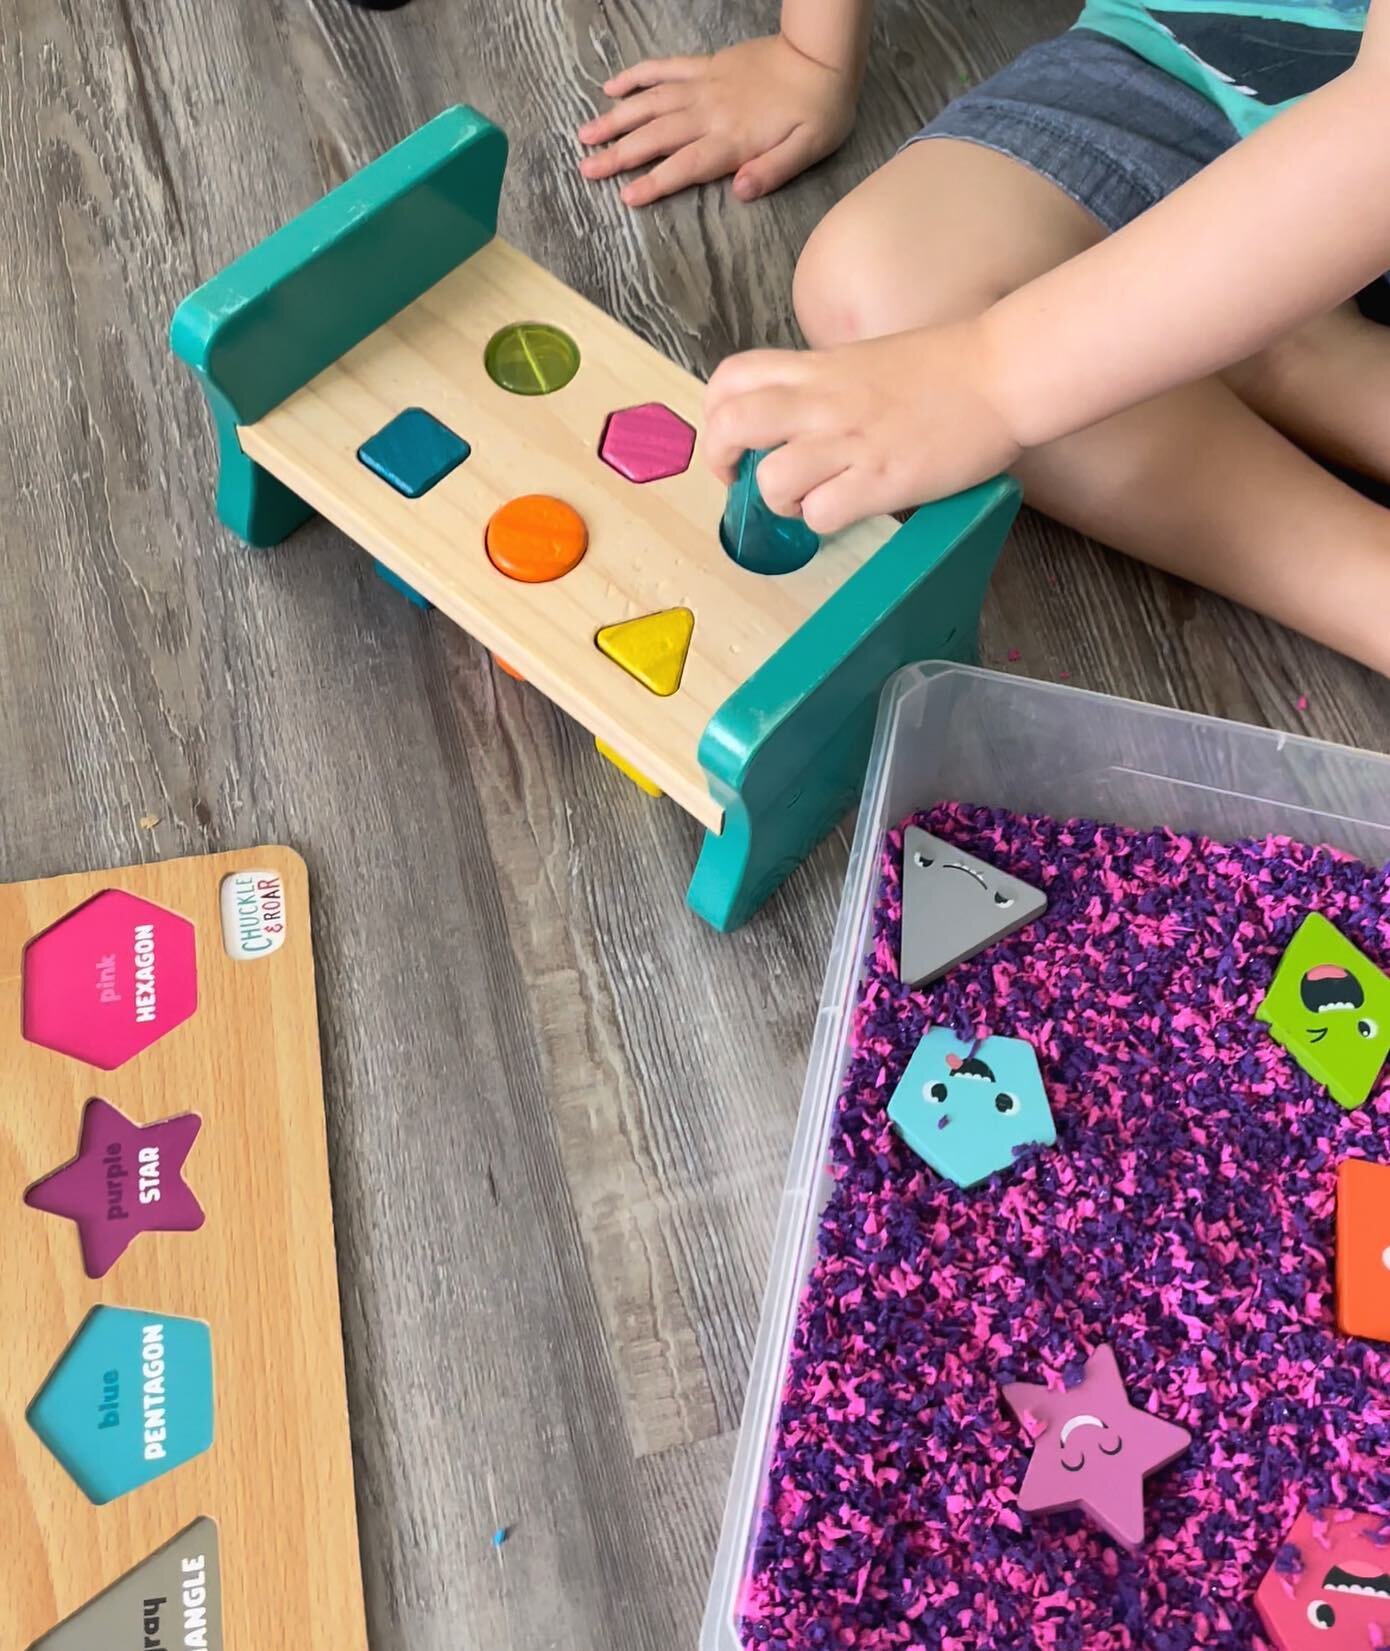 Kicking off the week with some sensory play 🌀 
It is so fun to create activities that incorporate multiple skills &amp; goals while following the child&rsquo;s lead. This child is specifically motivated by the hammer &amp; peg toy but we added a sen